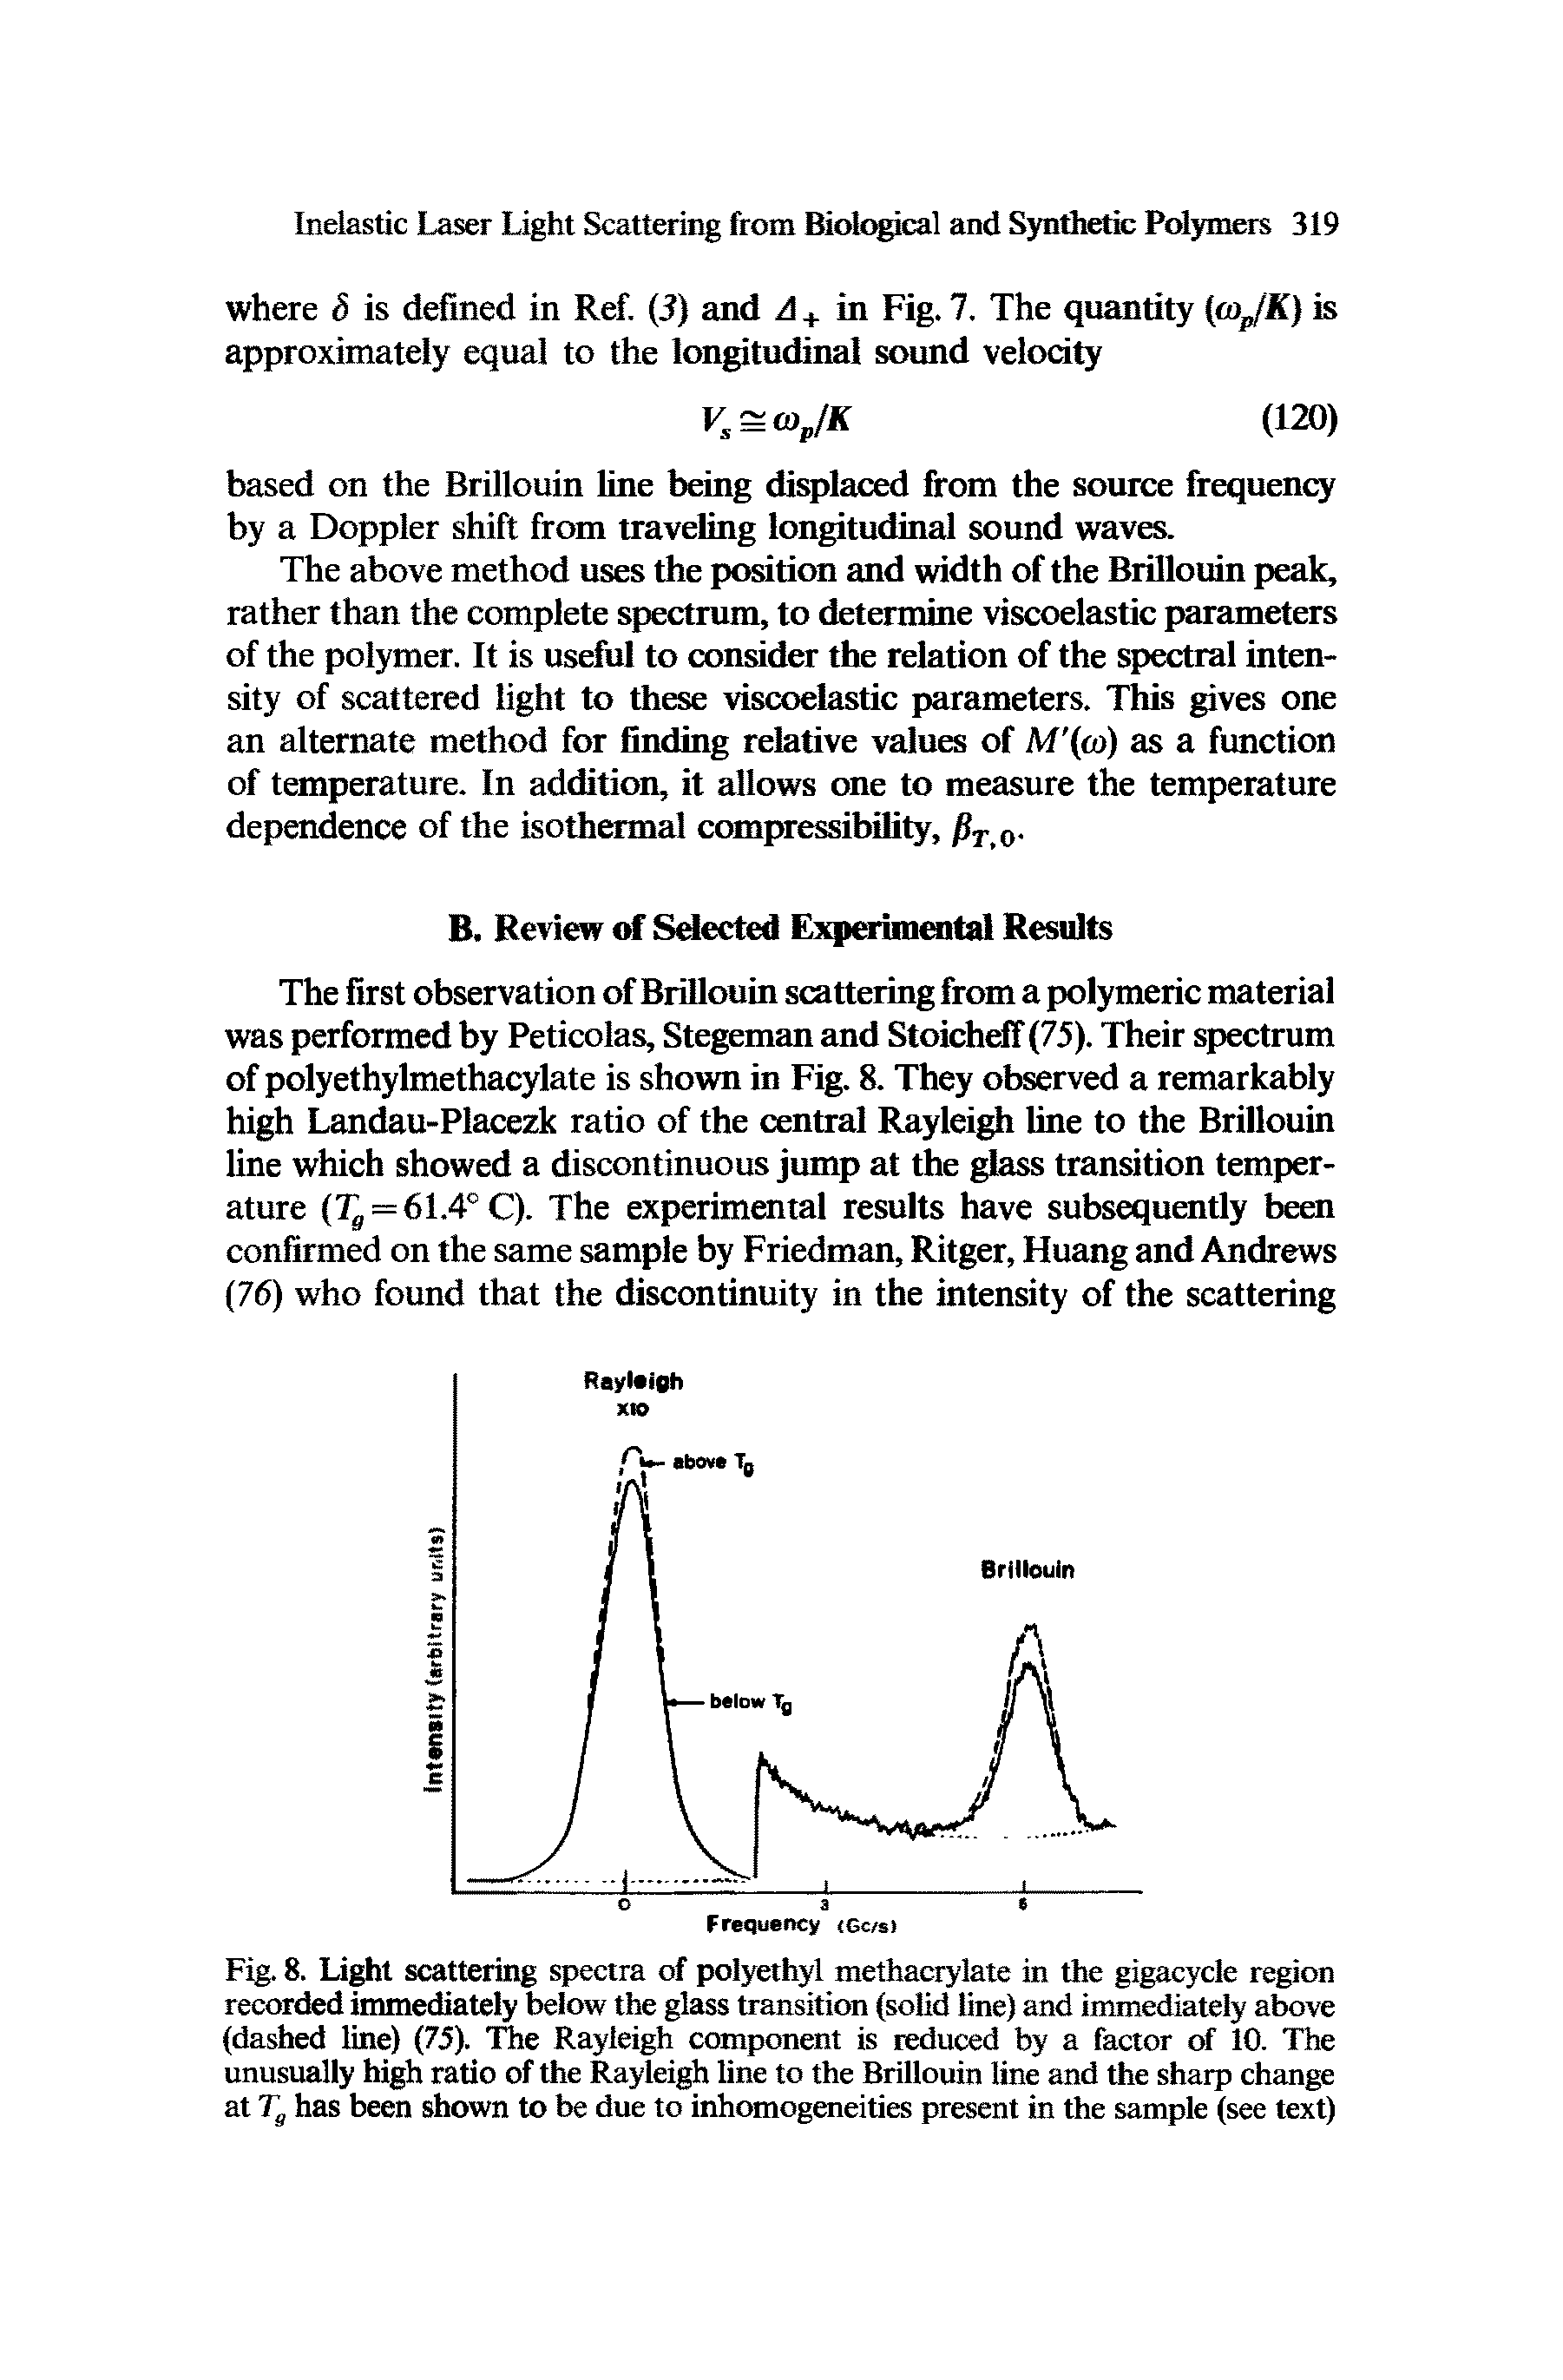 Fig. 8. Li t scattering spectra of polyethyl methacrylate in the gigacycle region recorded immediately below the glass transition (solid line) and immediately above (dashed line) (75). The Rayleigh component is reduced by a factor of 10. The unusually high ratio of the Rayleigh line to the Brillouin line and the sharp change atr, has been shown to be due to inhomogeneities present in the sample (see text)...